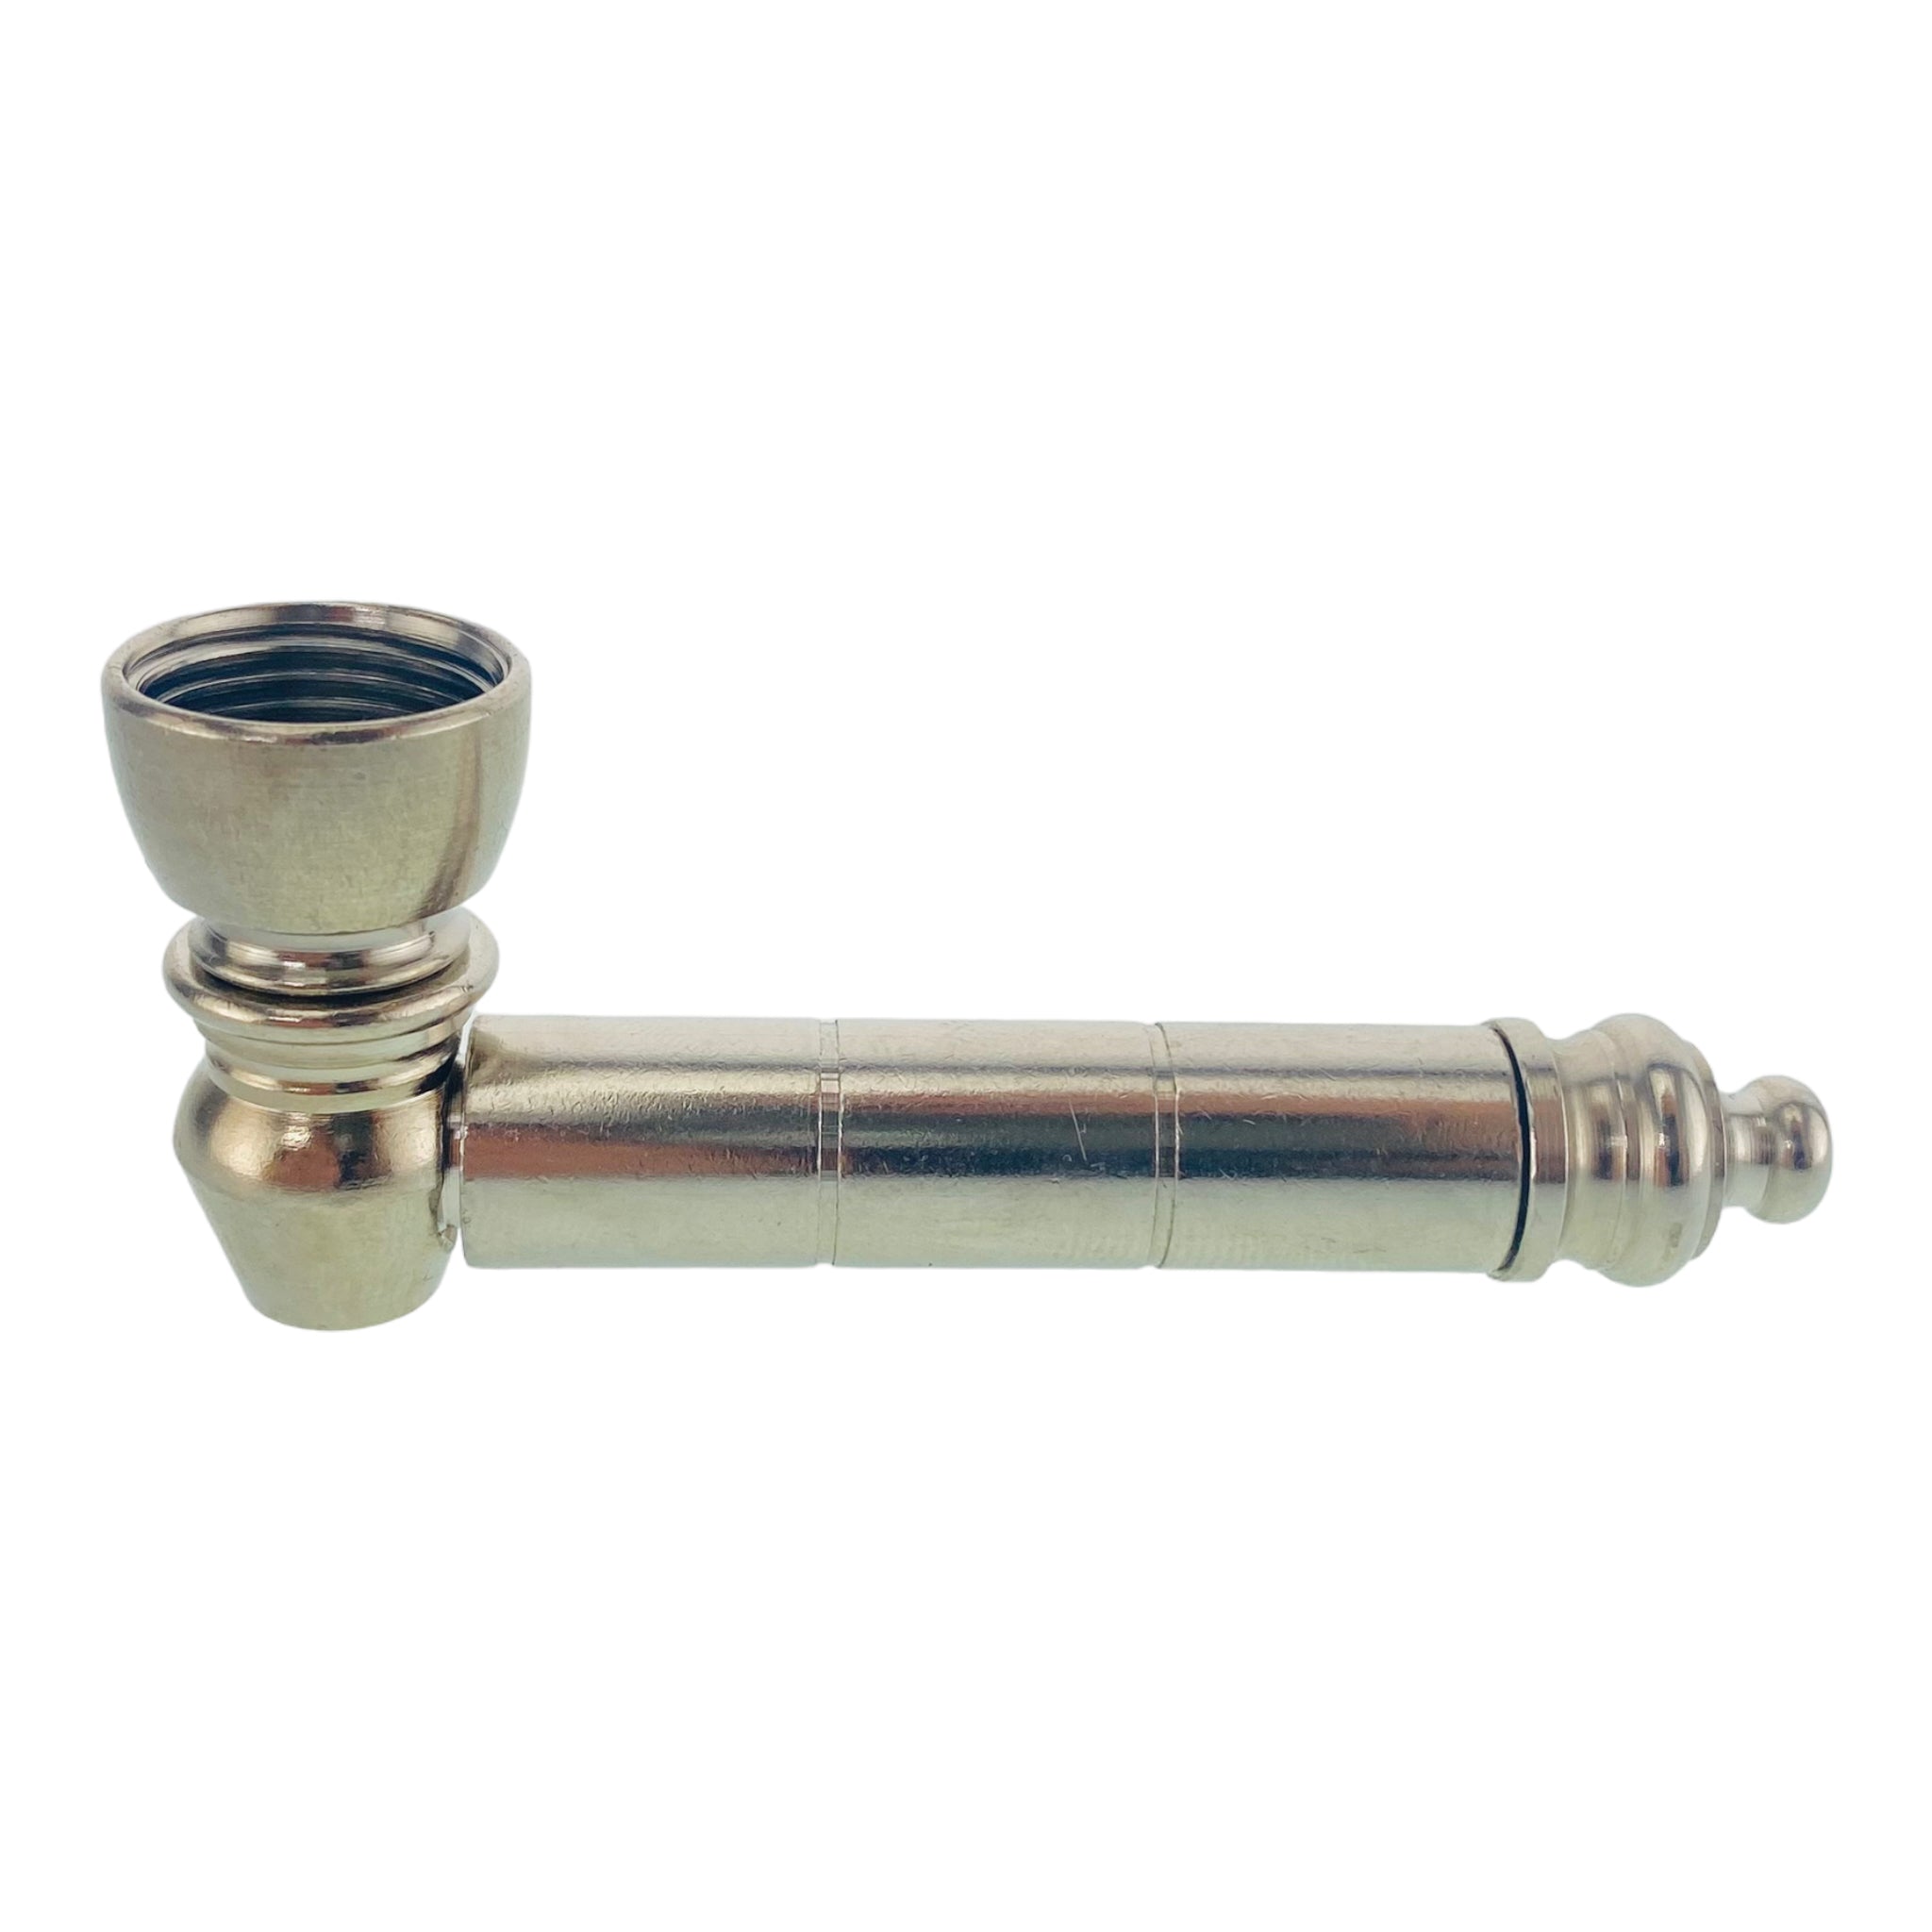 Metal Hand Pipes - Silver Basic Aluminum And Brass Metal Pipe With Small Chamber